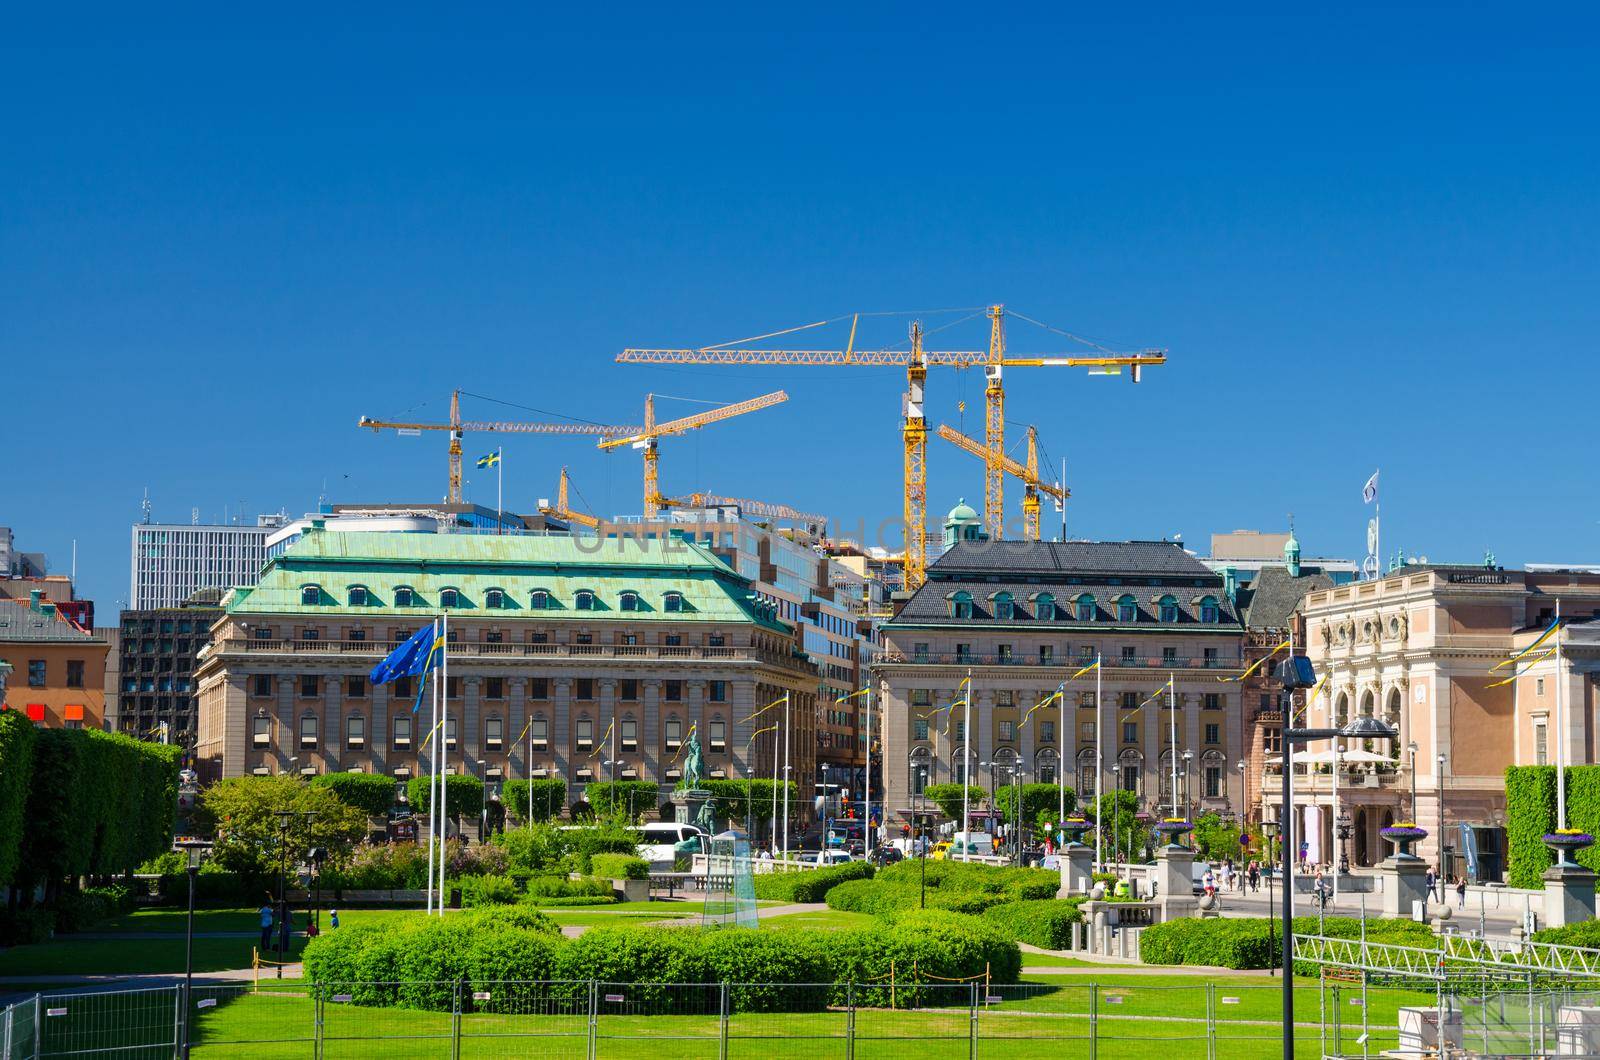 Riksplan green grass lawn, bushes and street with national flags on Sodermalm island, Gustav Adolfs torg, Royal Swedish Opera house building, blue sky with yellow cranes background, Stockholm, Sweden